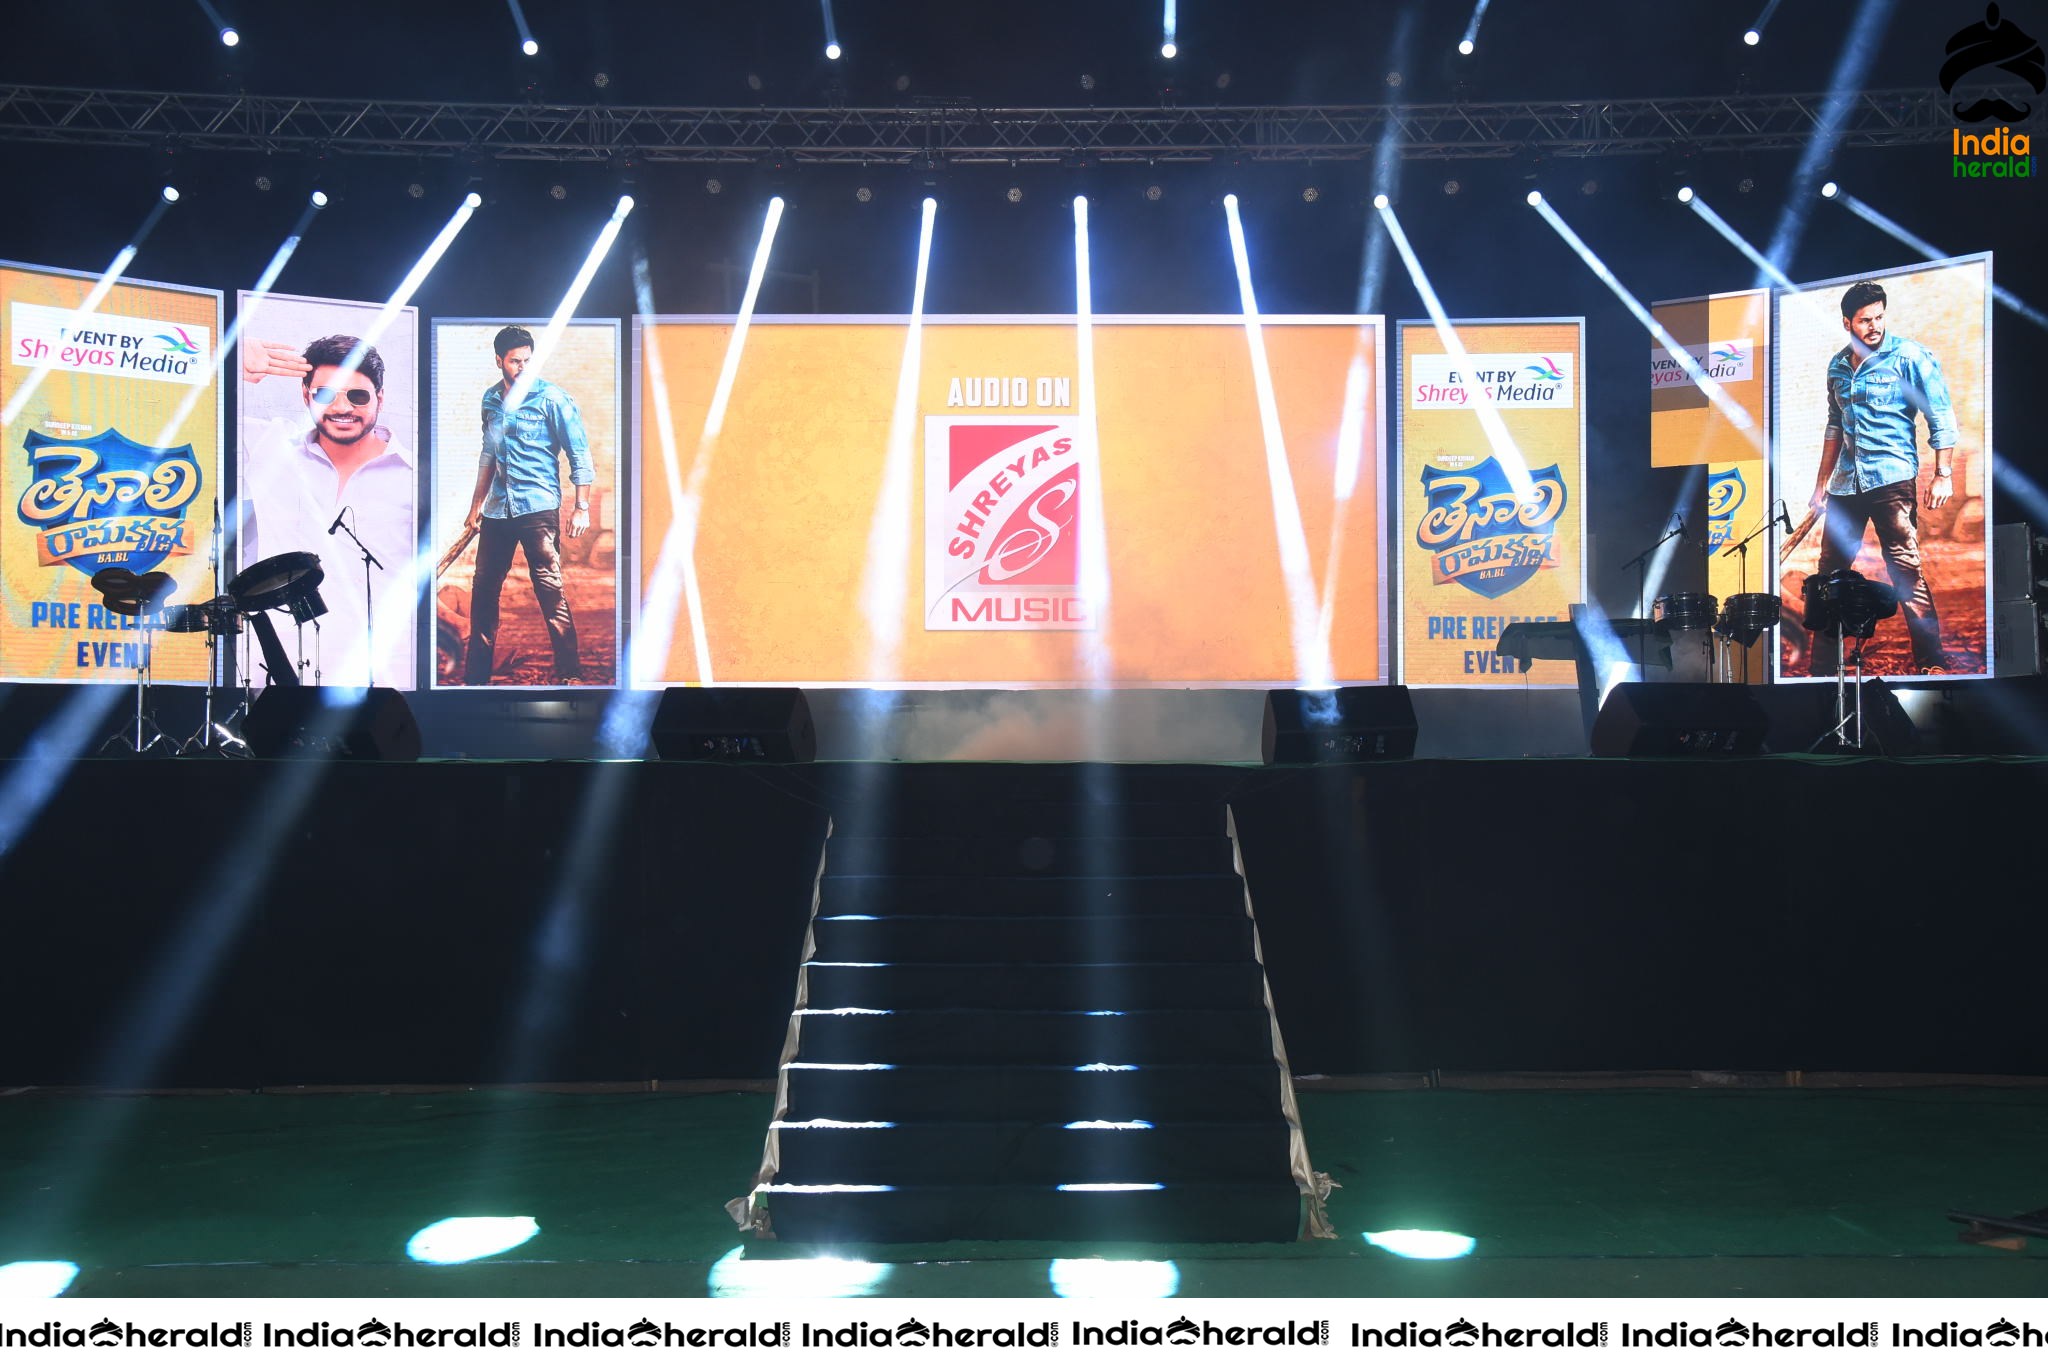 The Grand Stage and Entrance for Tenali Ramakrishna BA BL Pre Release Event Set 2